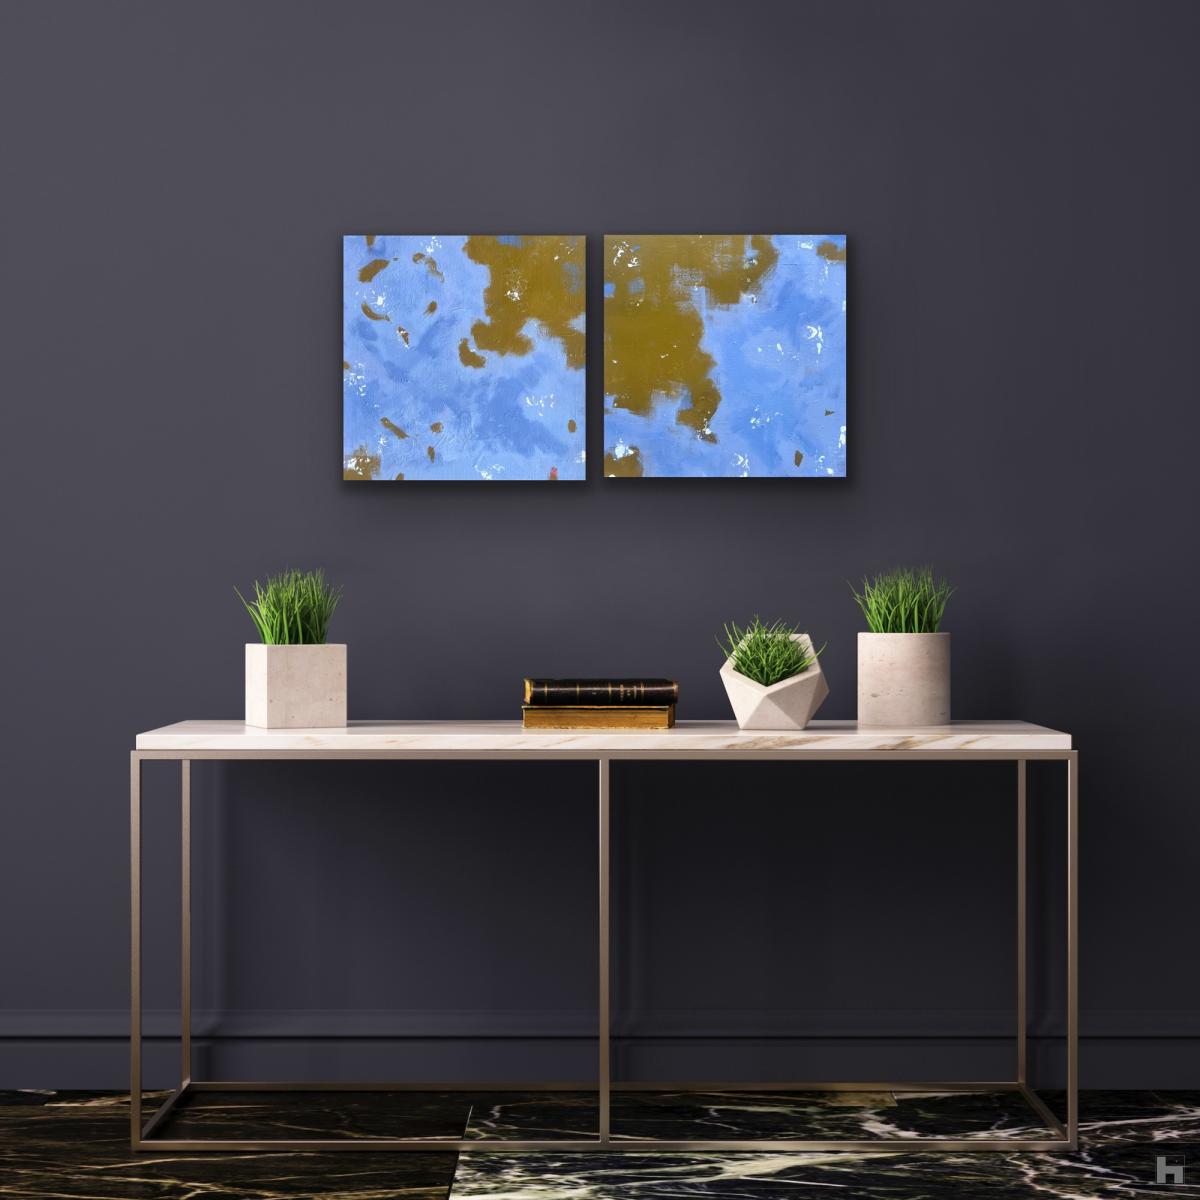 Two small blue paintings on a dark wall